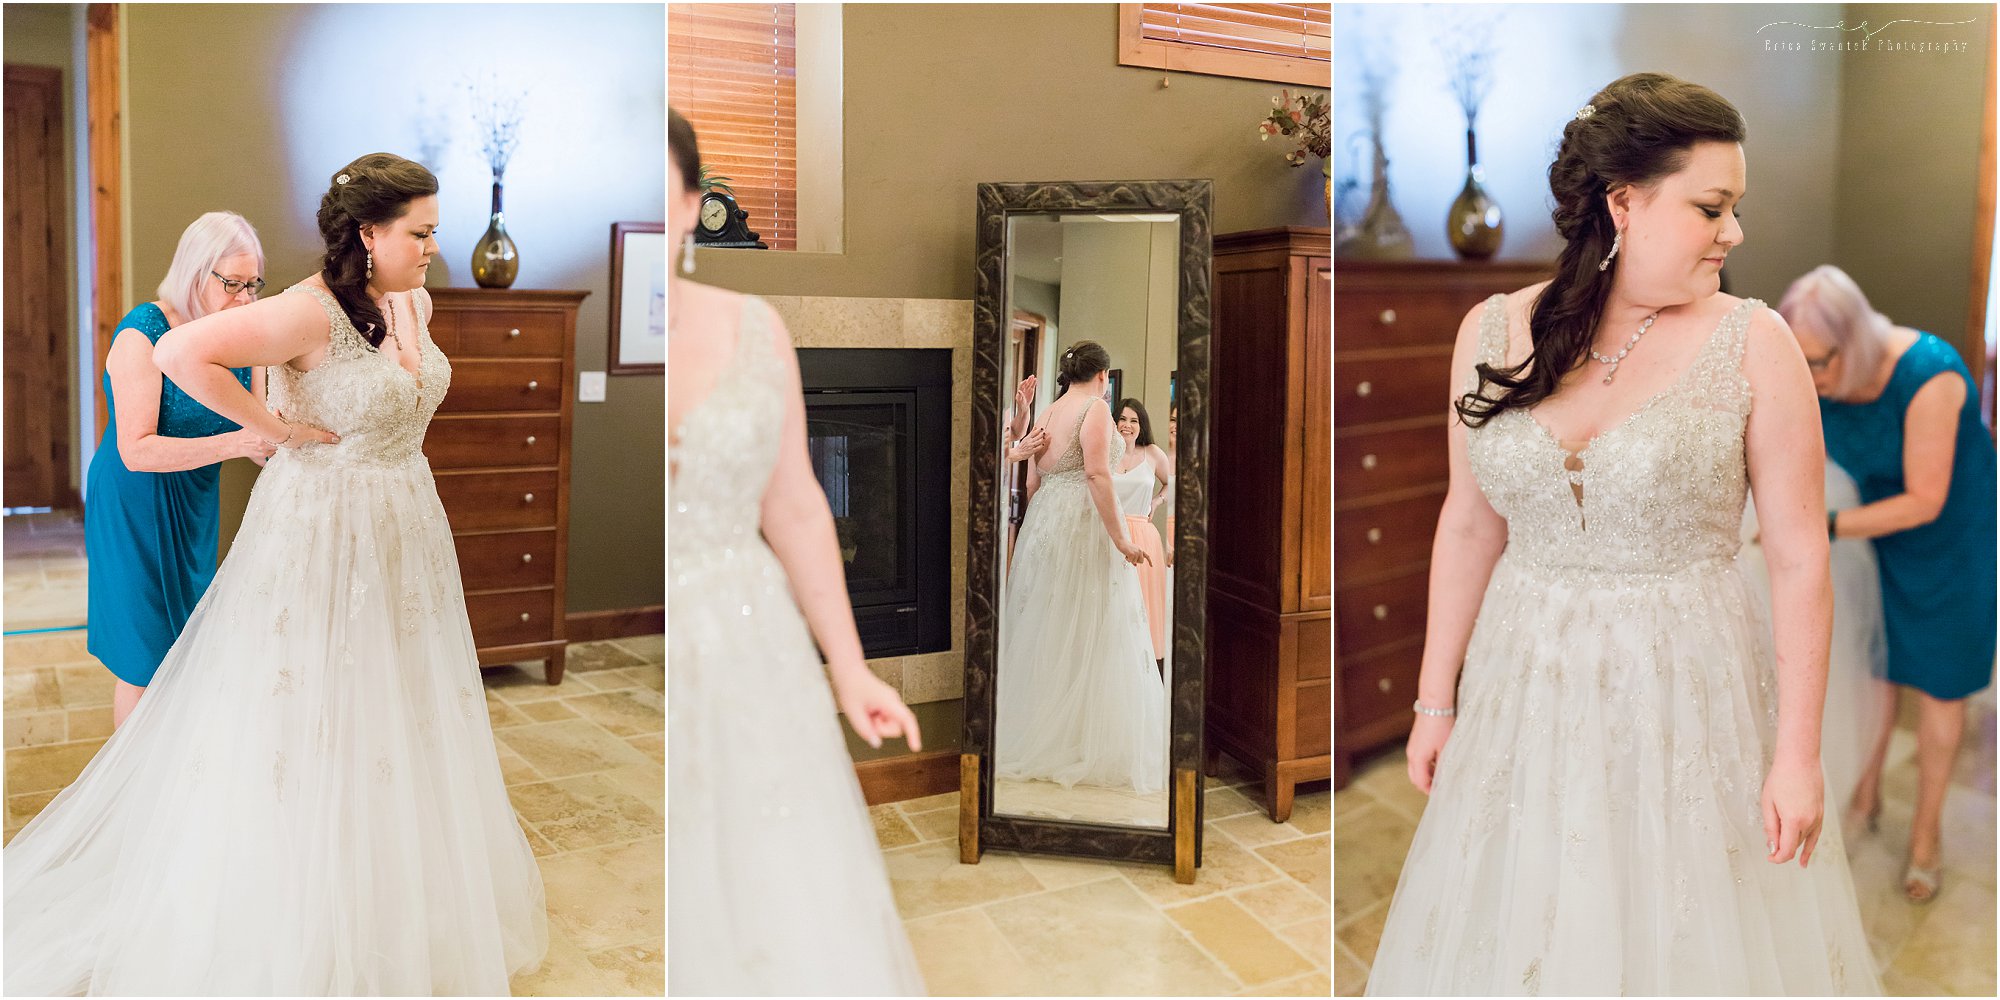 The mother of the bride helps her daughter into her gorgeous Stella York wedding gown captured by Bend wedding photographer, Erica Swantek Photography. 